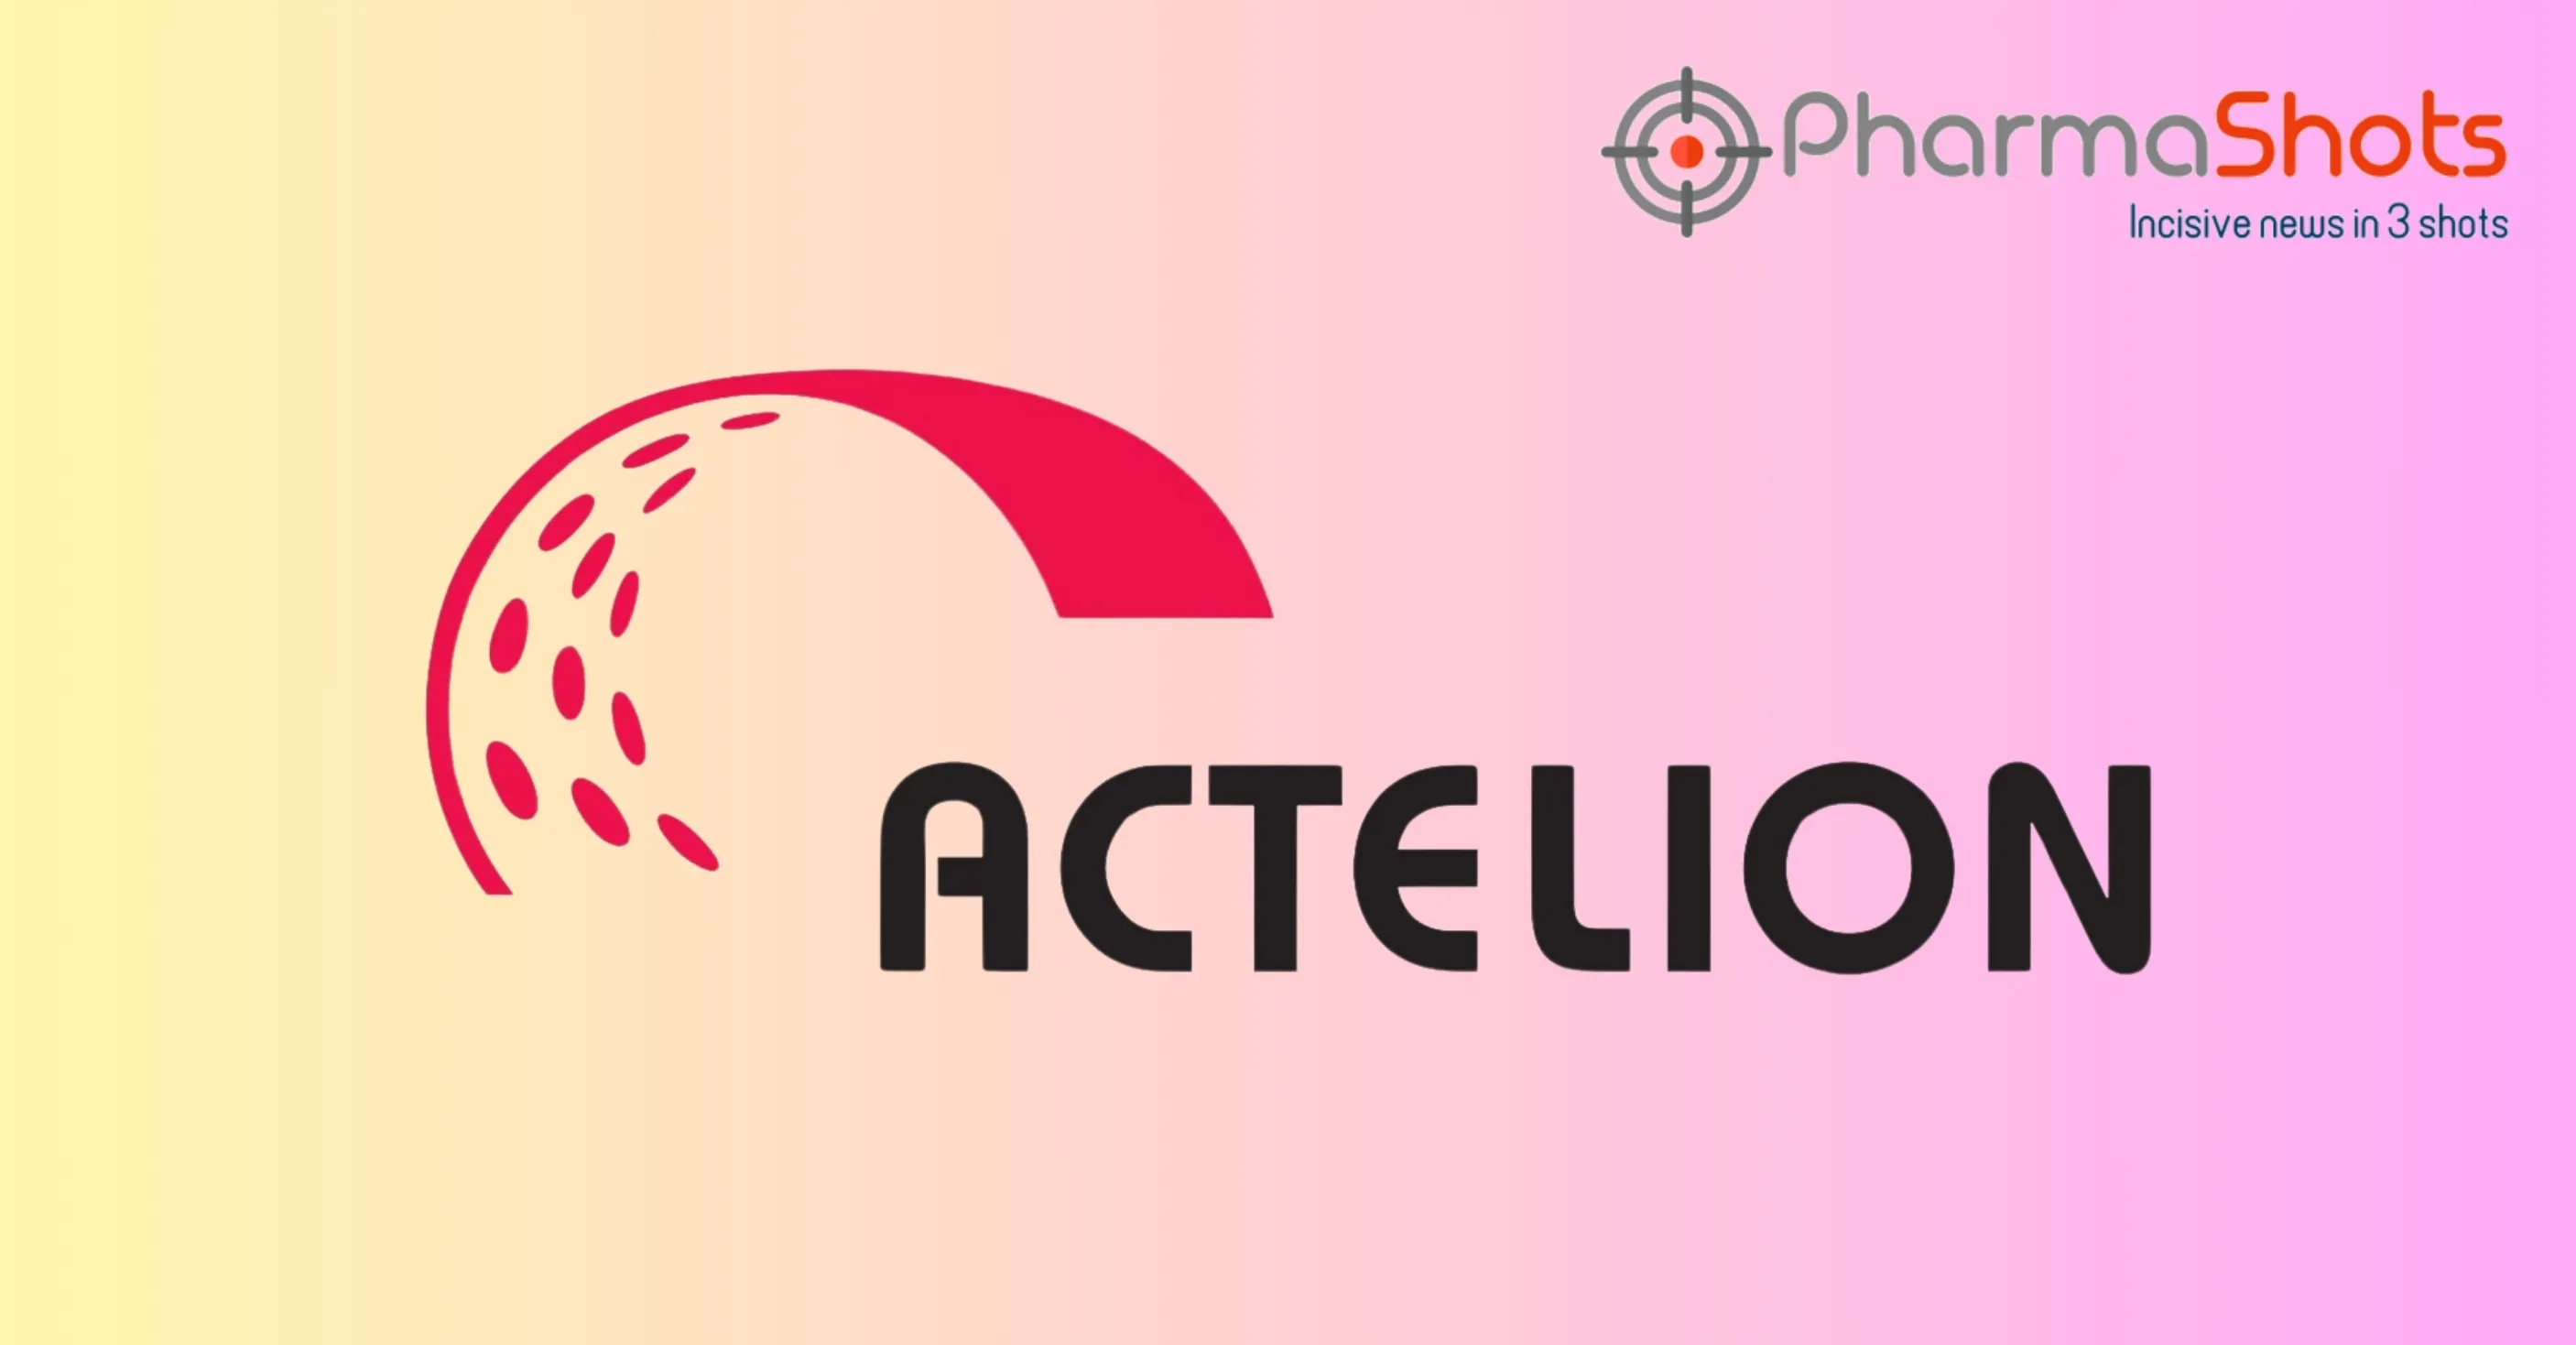 Vanda Pharmaceuticals to Acquire the US and Canadian Rights for Ponvory from Actelion to Treat Relapsing Multiple Sclerosis